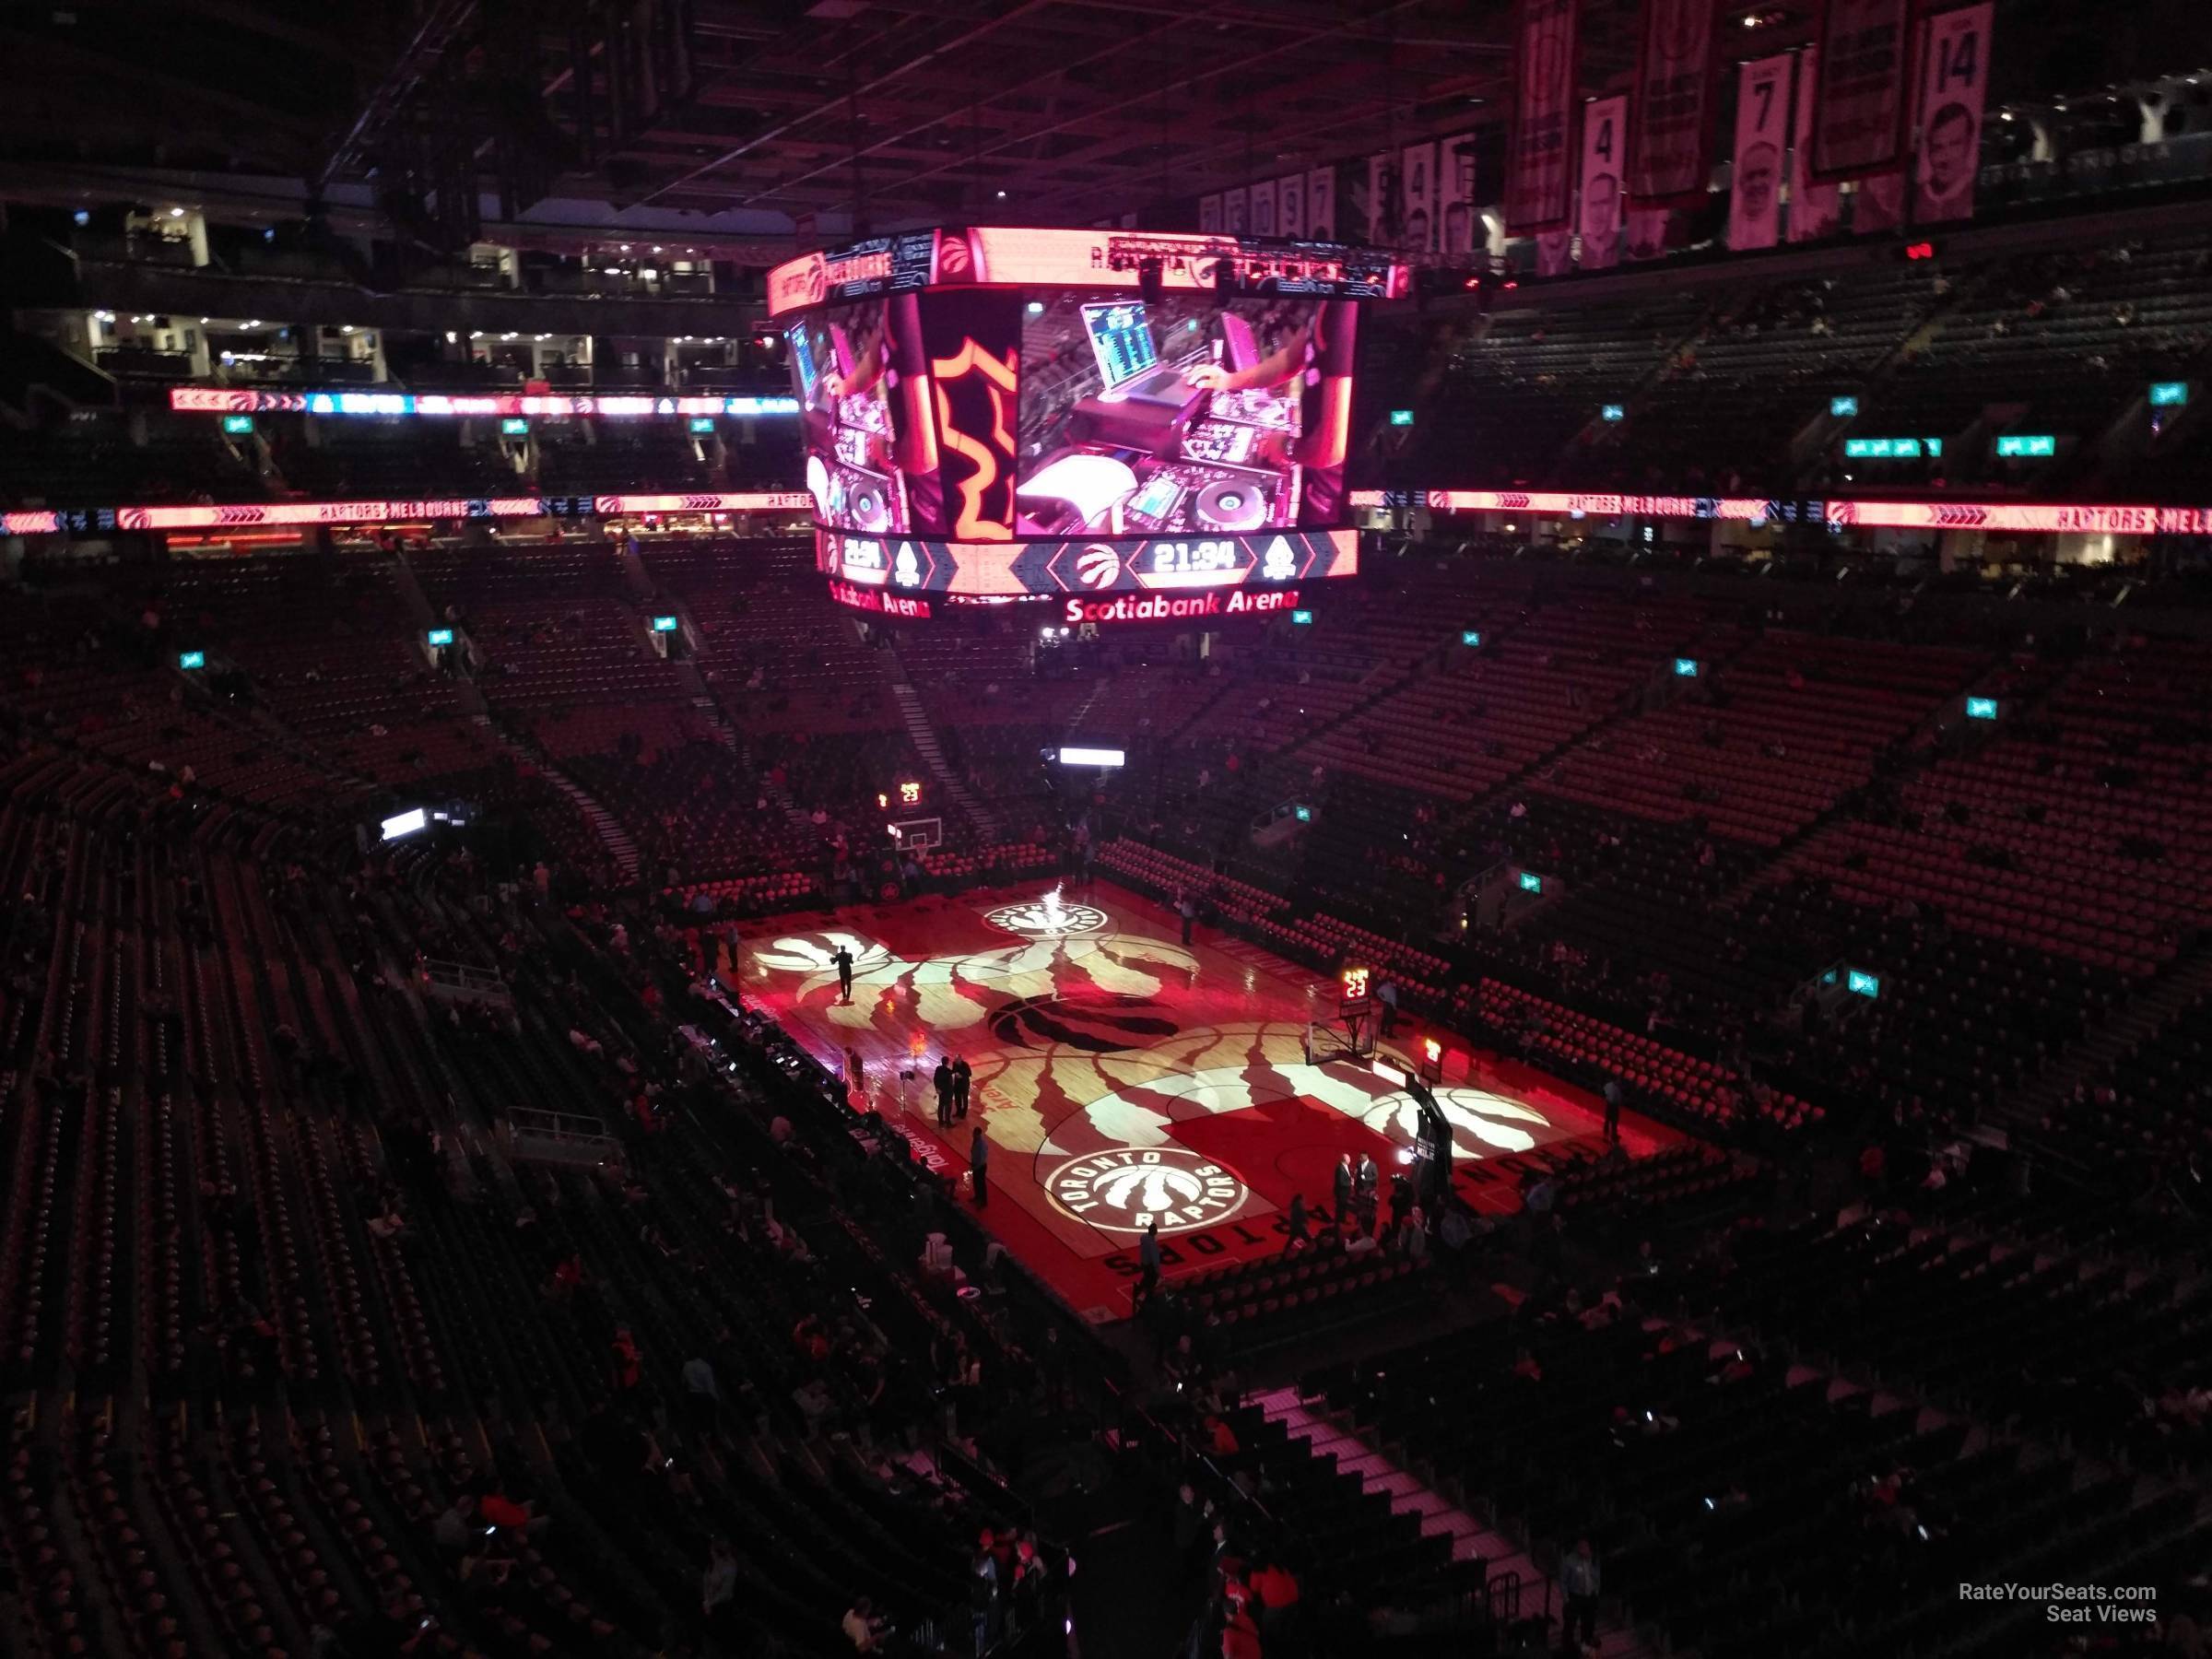 Scotiabank Arena, section 318, home of Toronto Maple Leafs